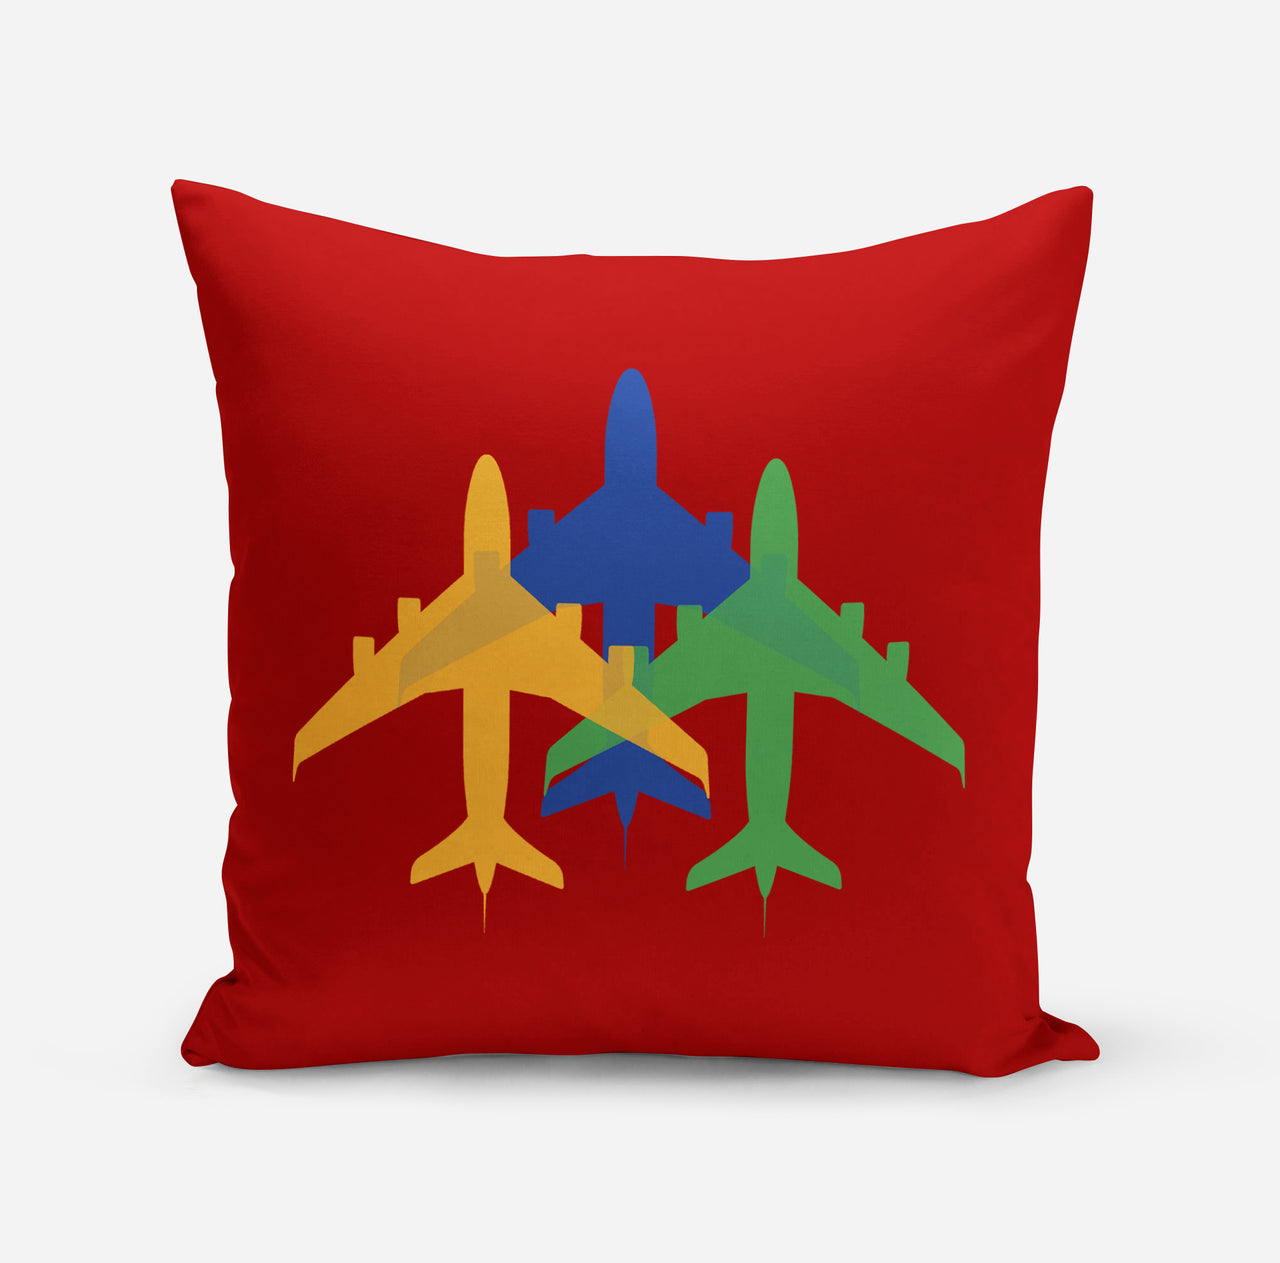 Colourful 3 Airplanes Designed Pillows